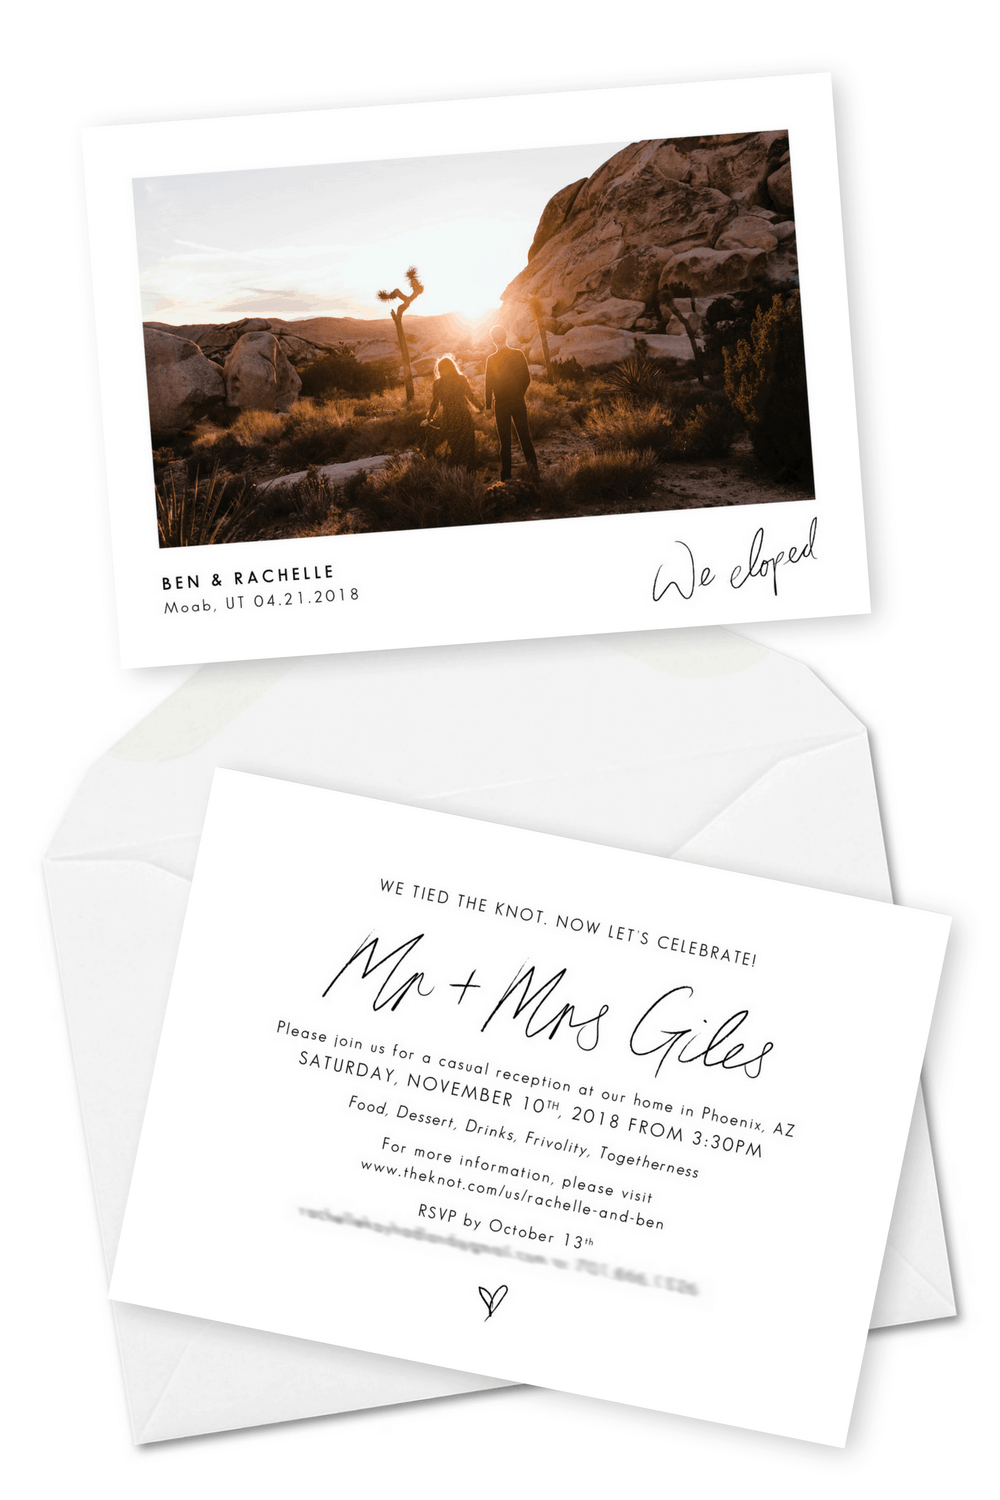 Wedding Announcement Cards and Elopement Invitation Ideas We Eloped The Hearnes Photography